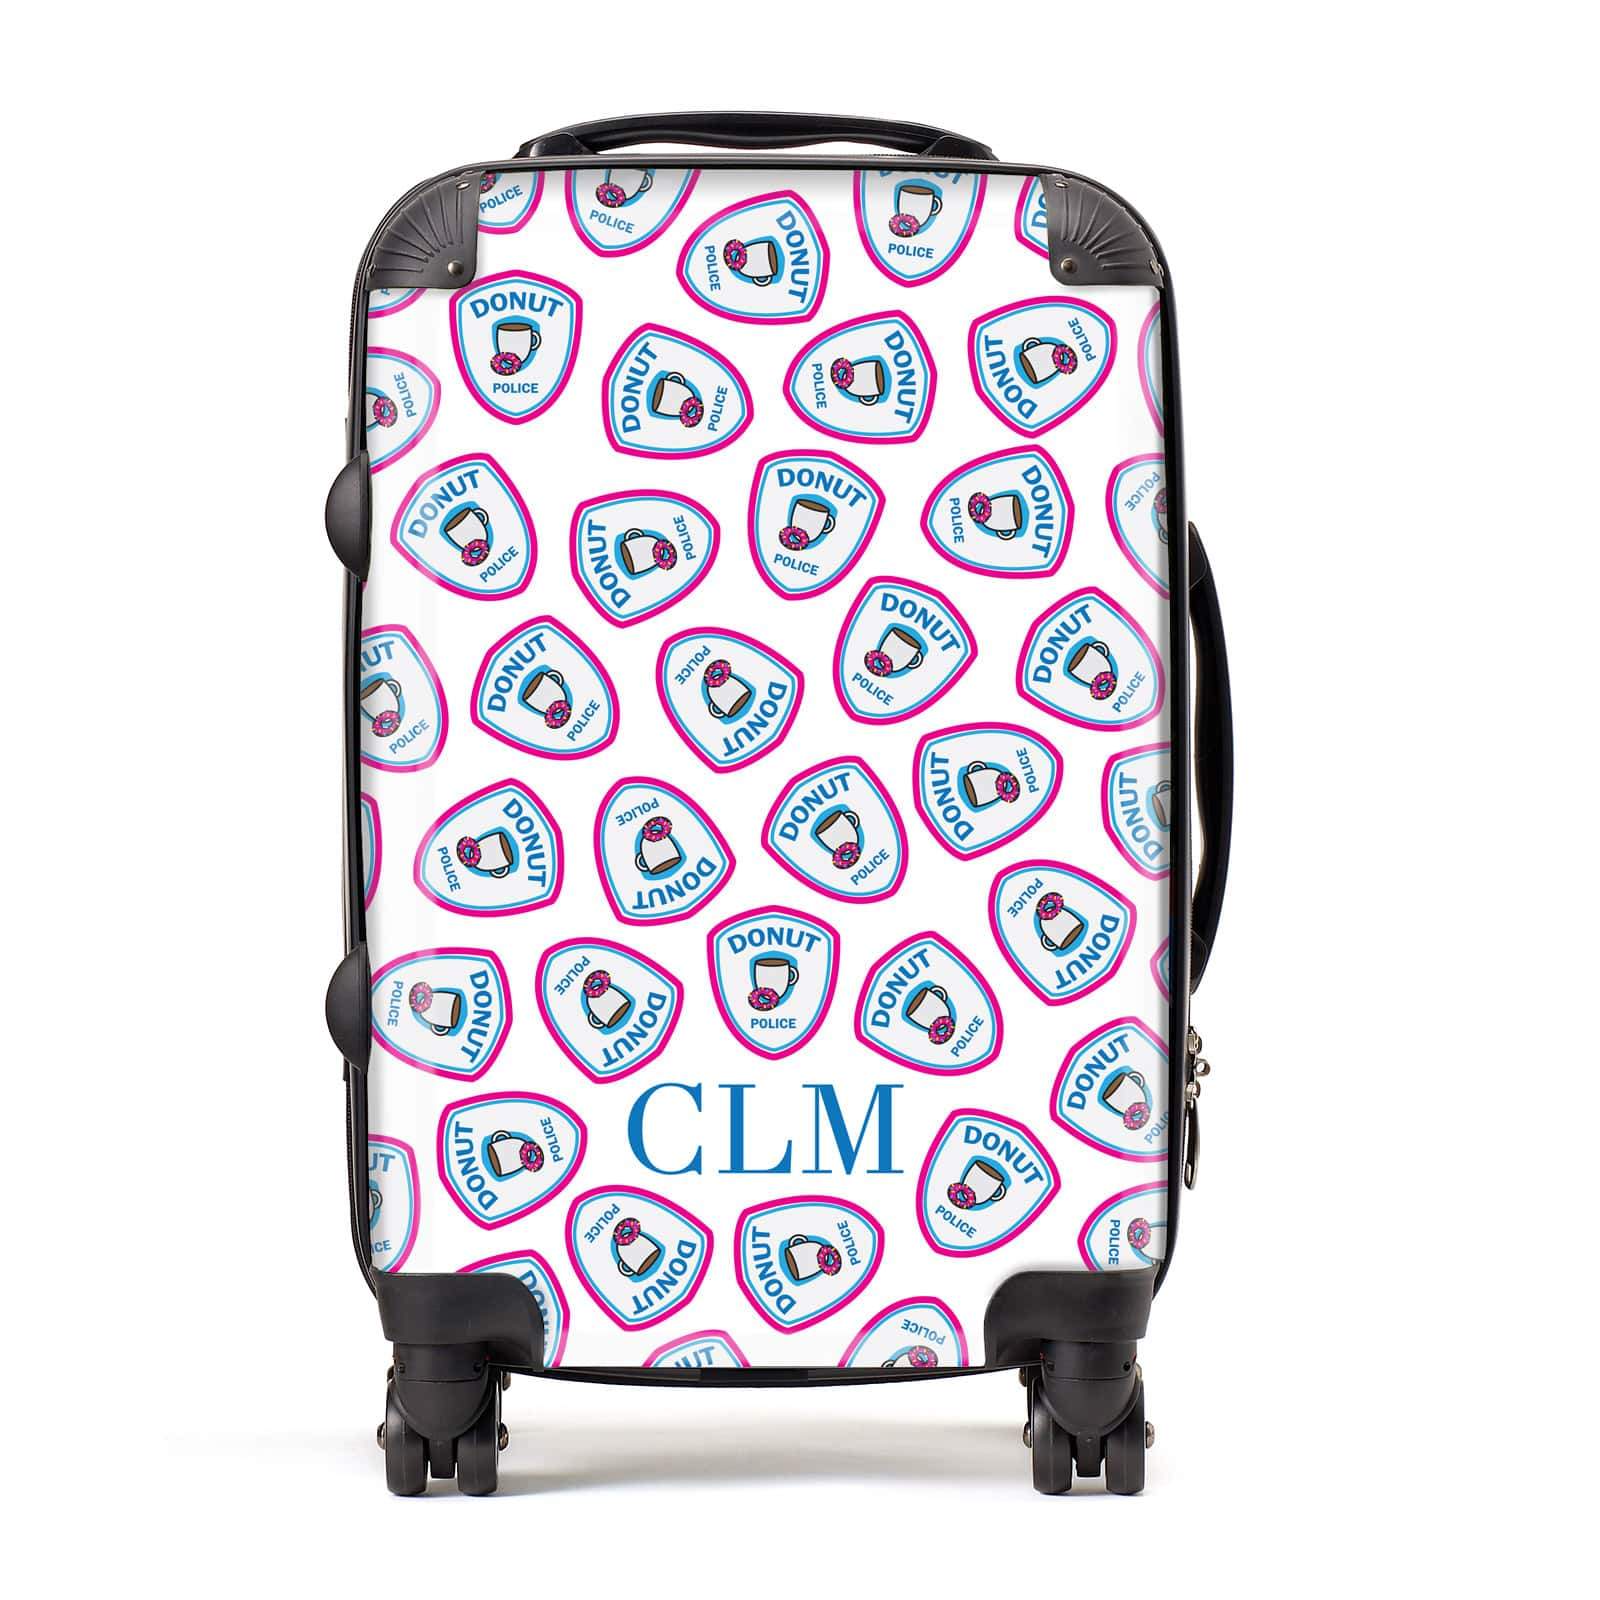 Personalised Donut Police Initials Suitcase